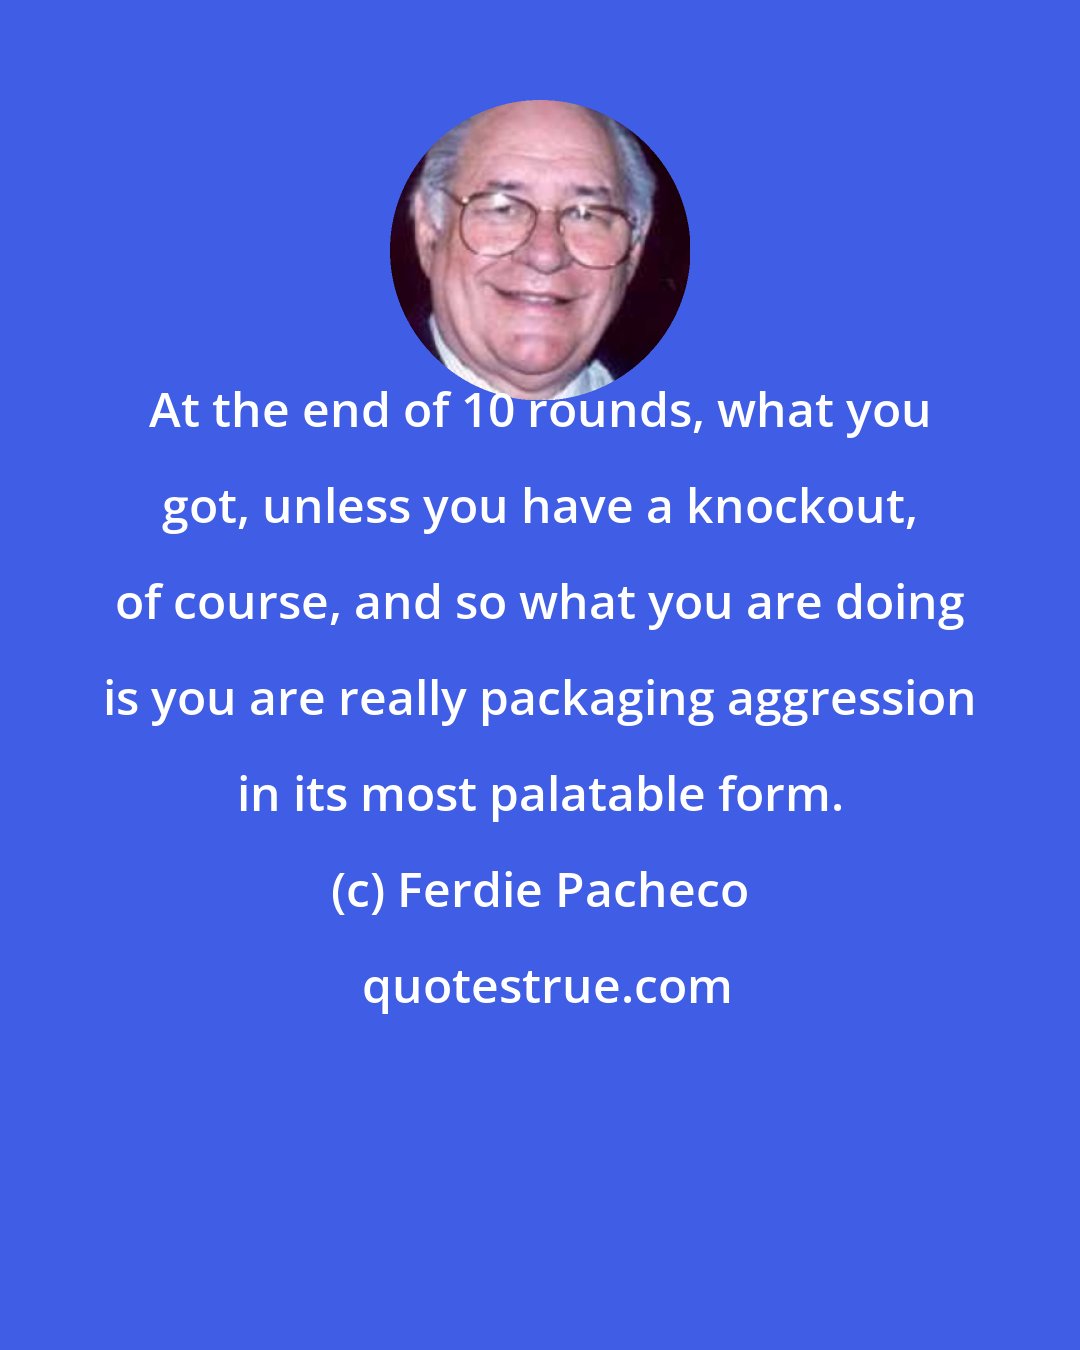 Ferdie Pacheco: At the end of 10 rounds, what you got, unless you have a knockout, of course, and so what you are doing is you are really packaging aggression in its most palatable form.